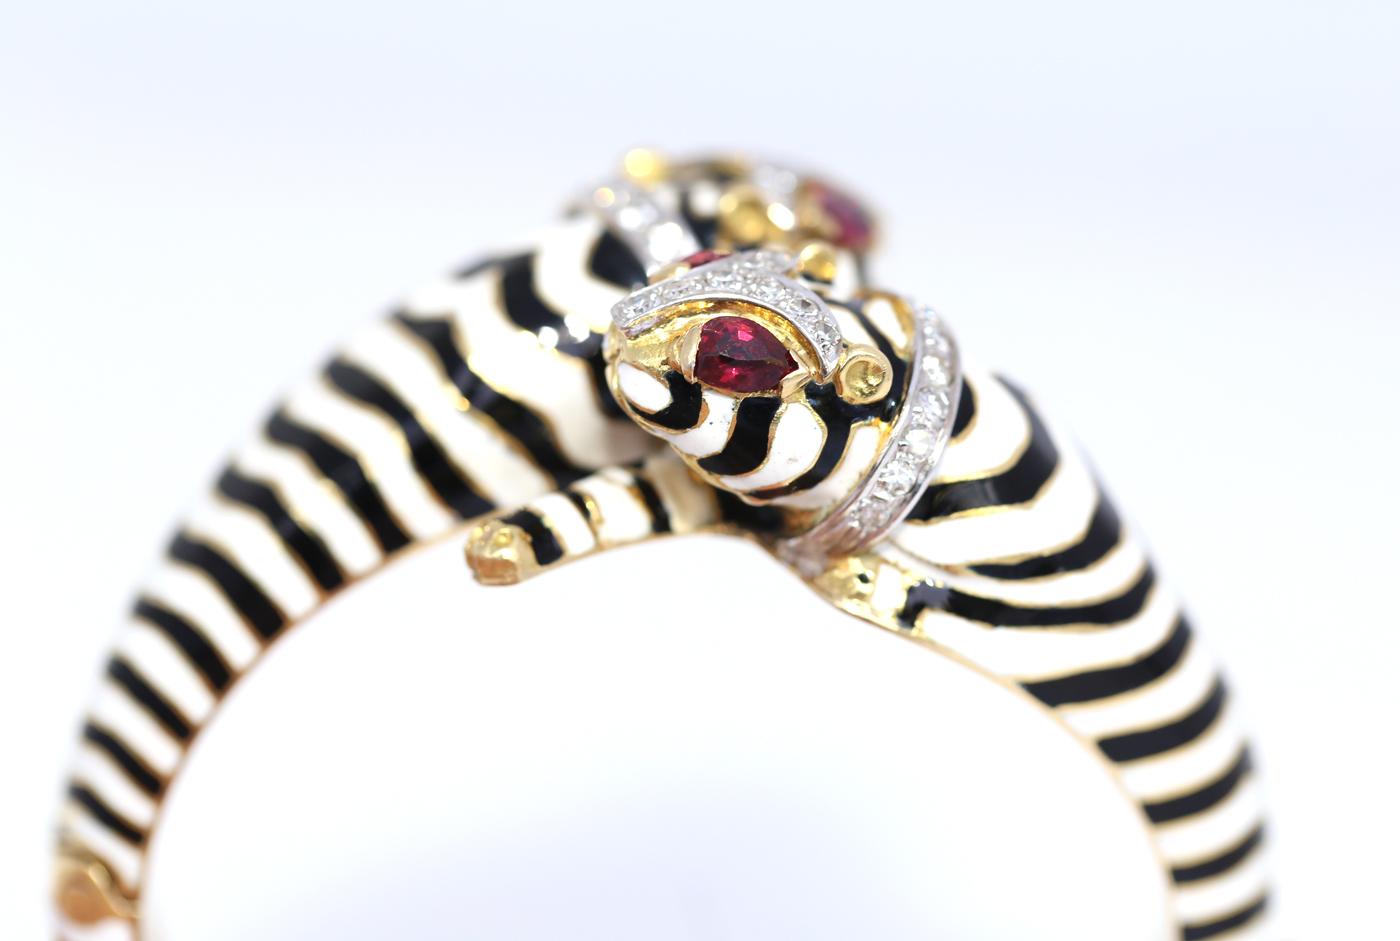 A tiger bracelet in zebra colours of Black White Enamel, fine Rubies depicting eyes. It is just such a 1960es item! So much colour and so much imagination infused in this fine bracelet. It is an attention-grabbing item whatever is the occasion. 

A